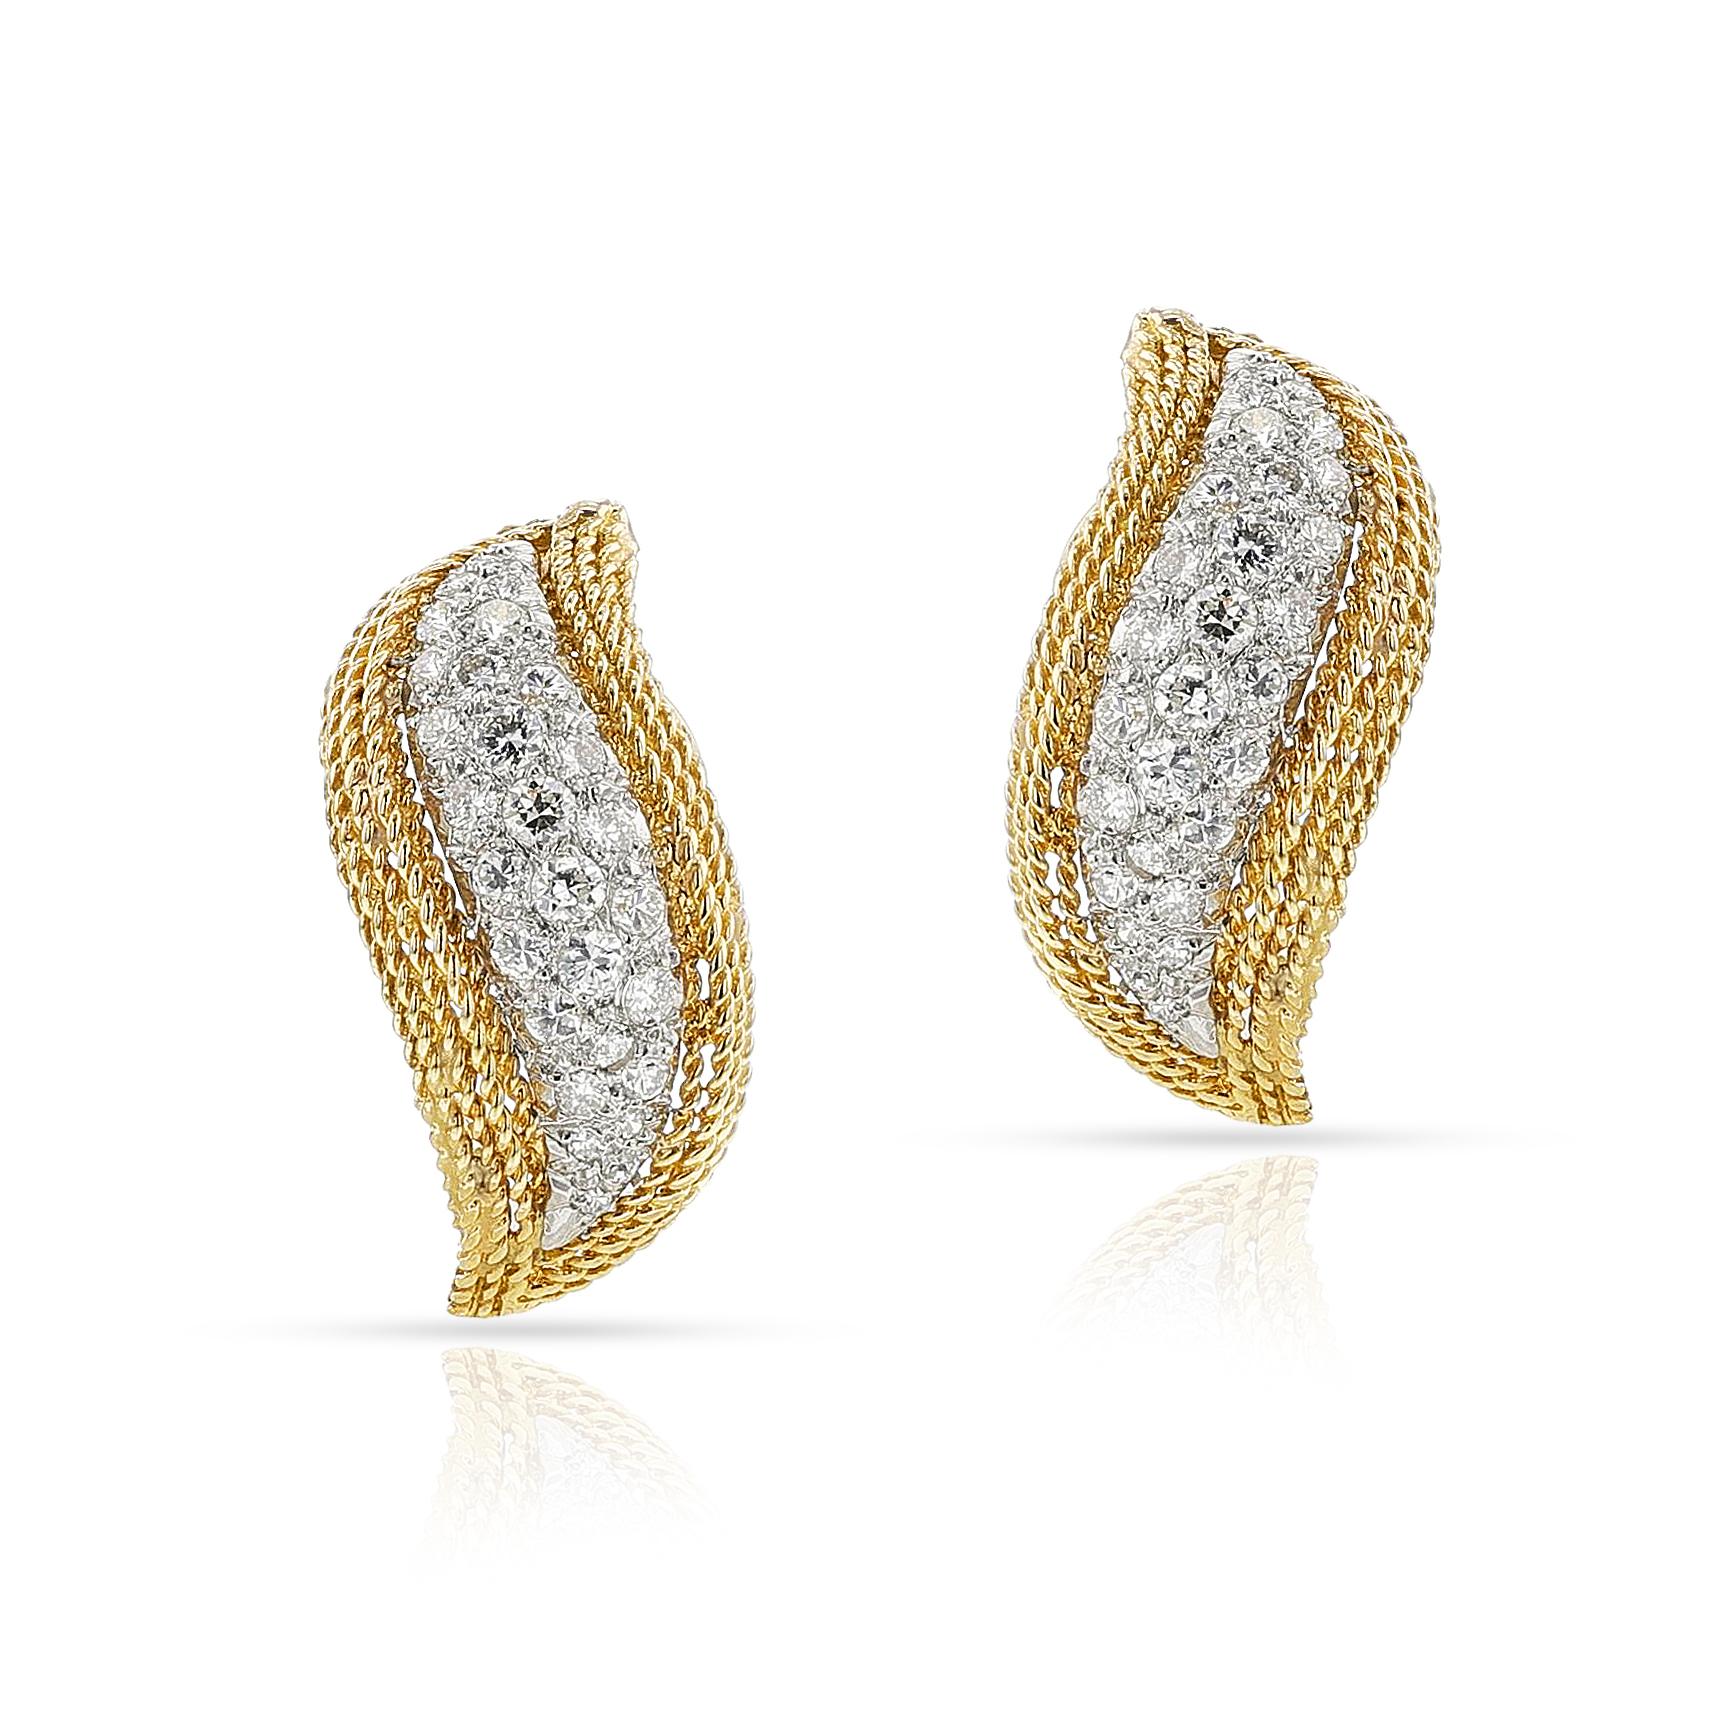 Round Cut Diamond and Gold Earrings, 18k For Sale